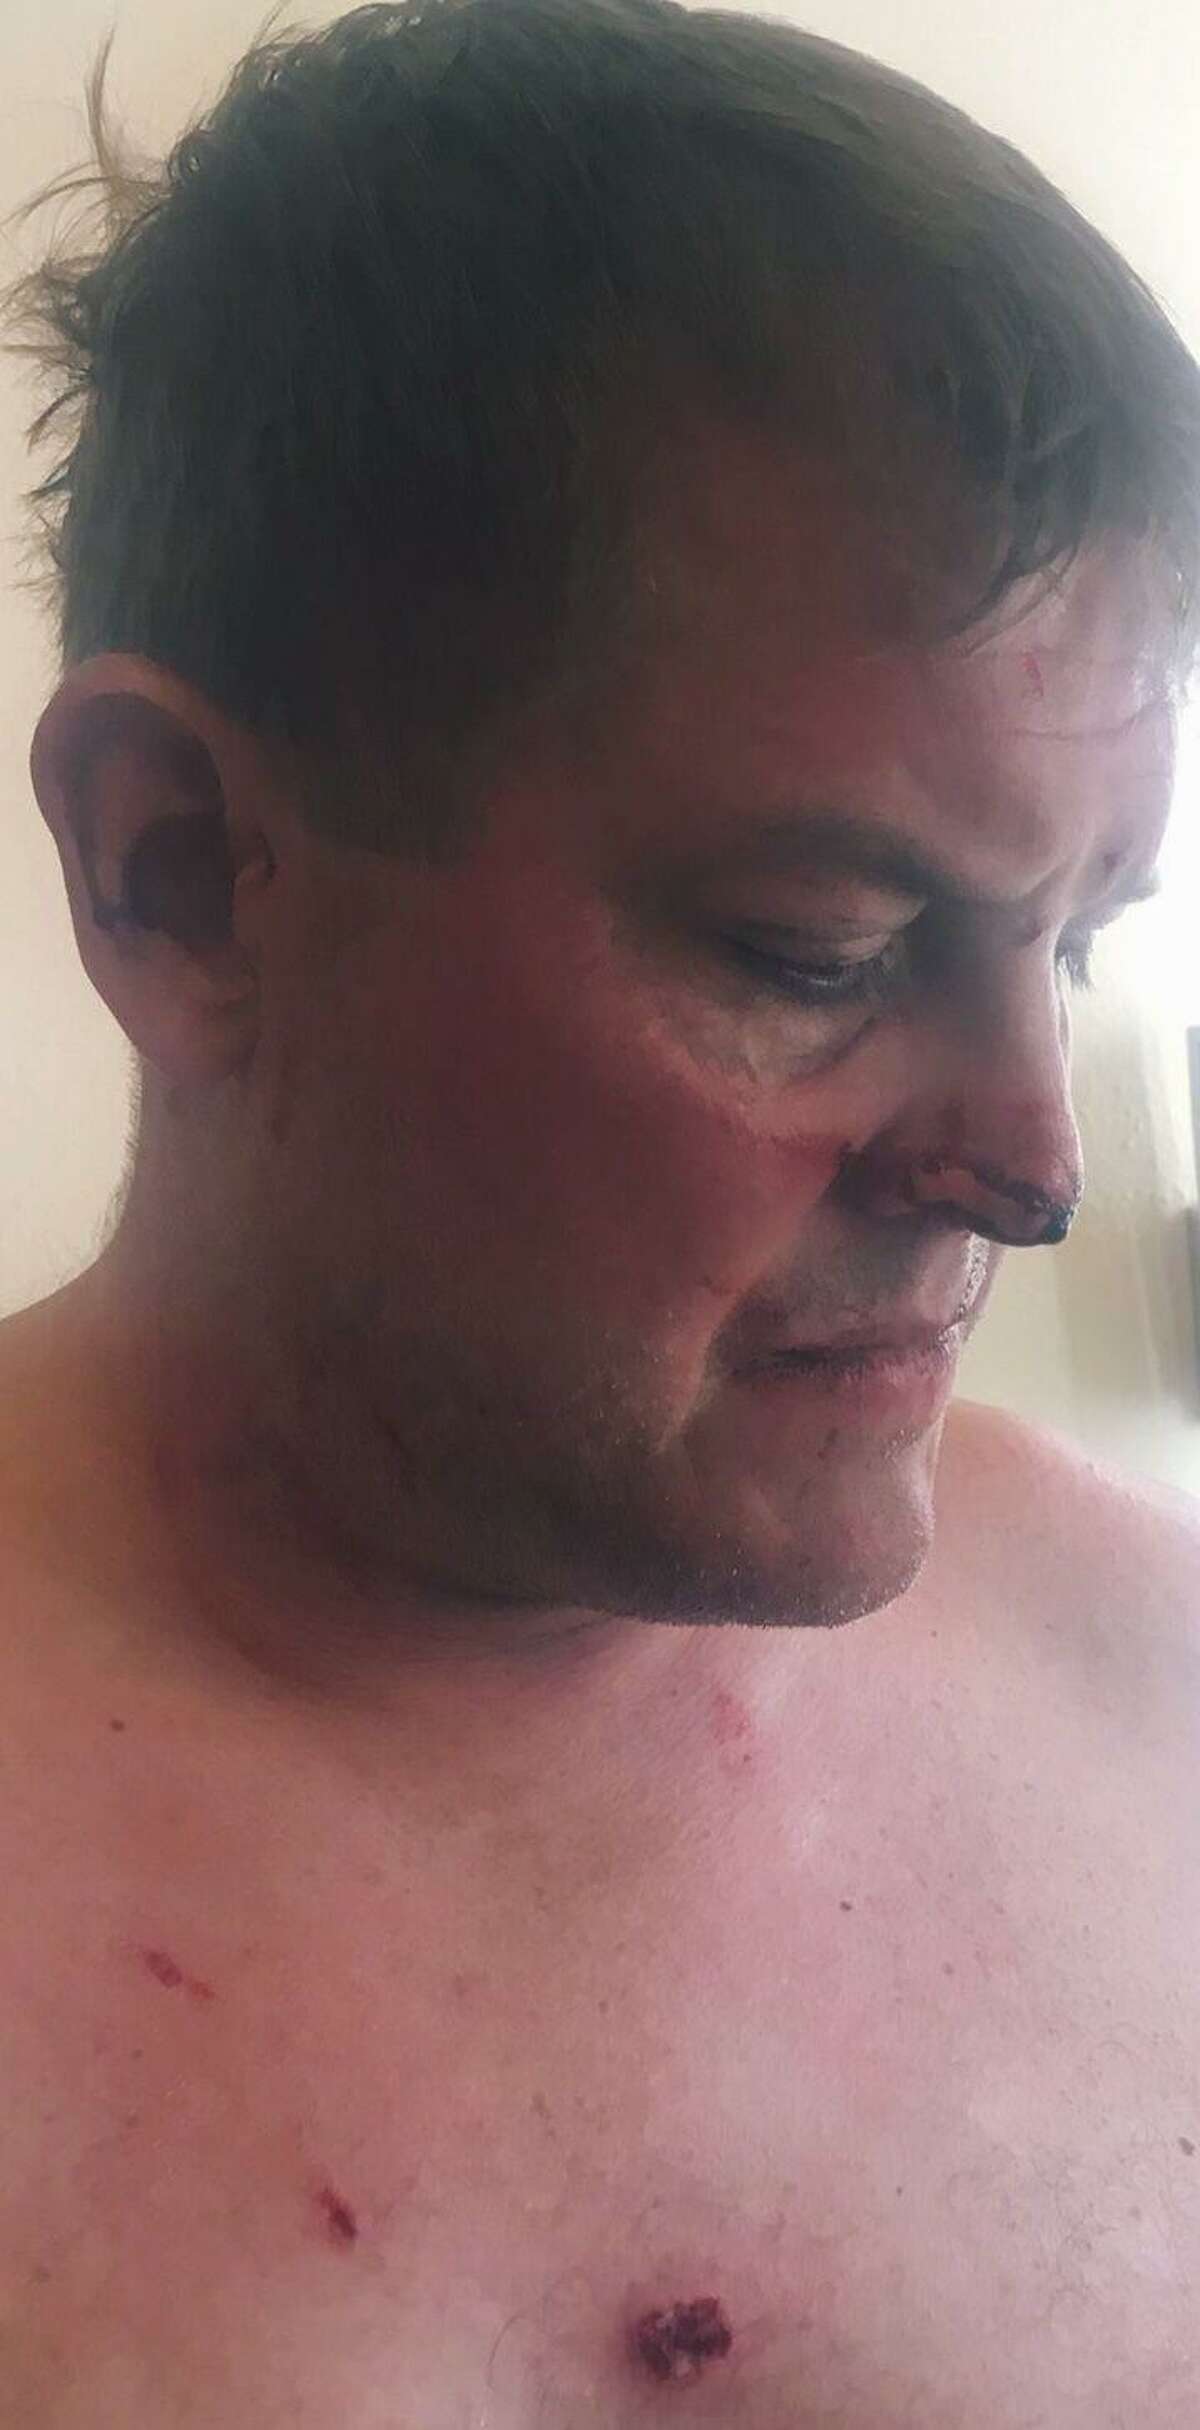 Gavin Scott Hapgood’s family released a photo showing bite marks to his face and chest they say occurred during a struggle with a hotel worker in Anguilla.